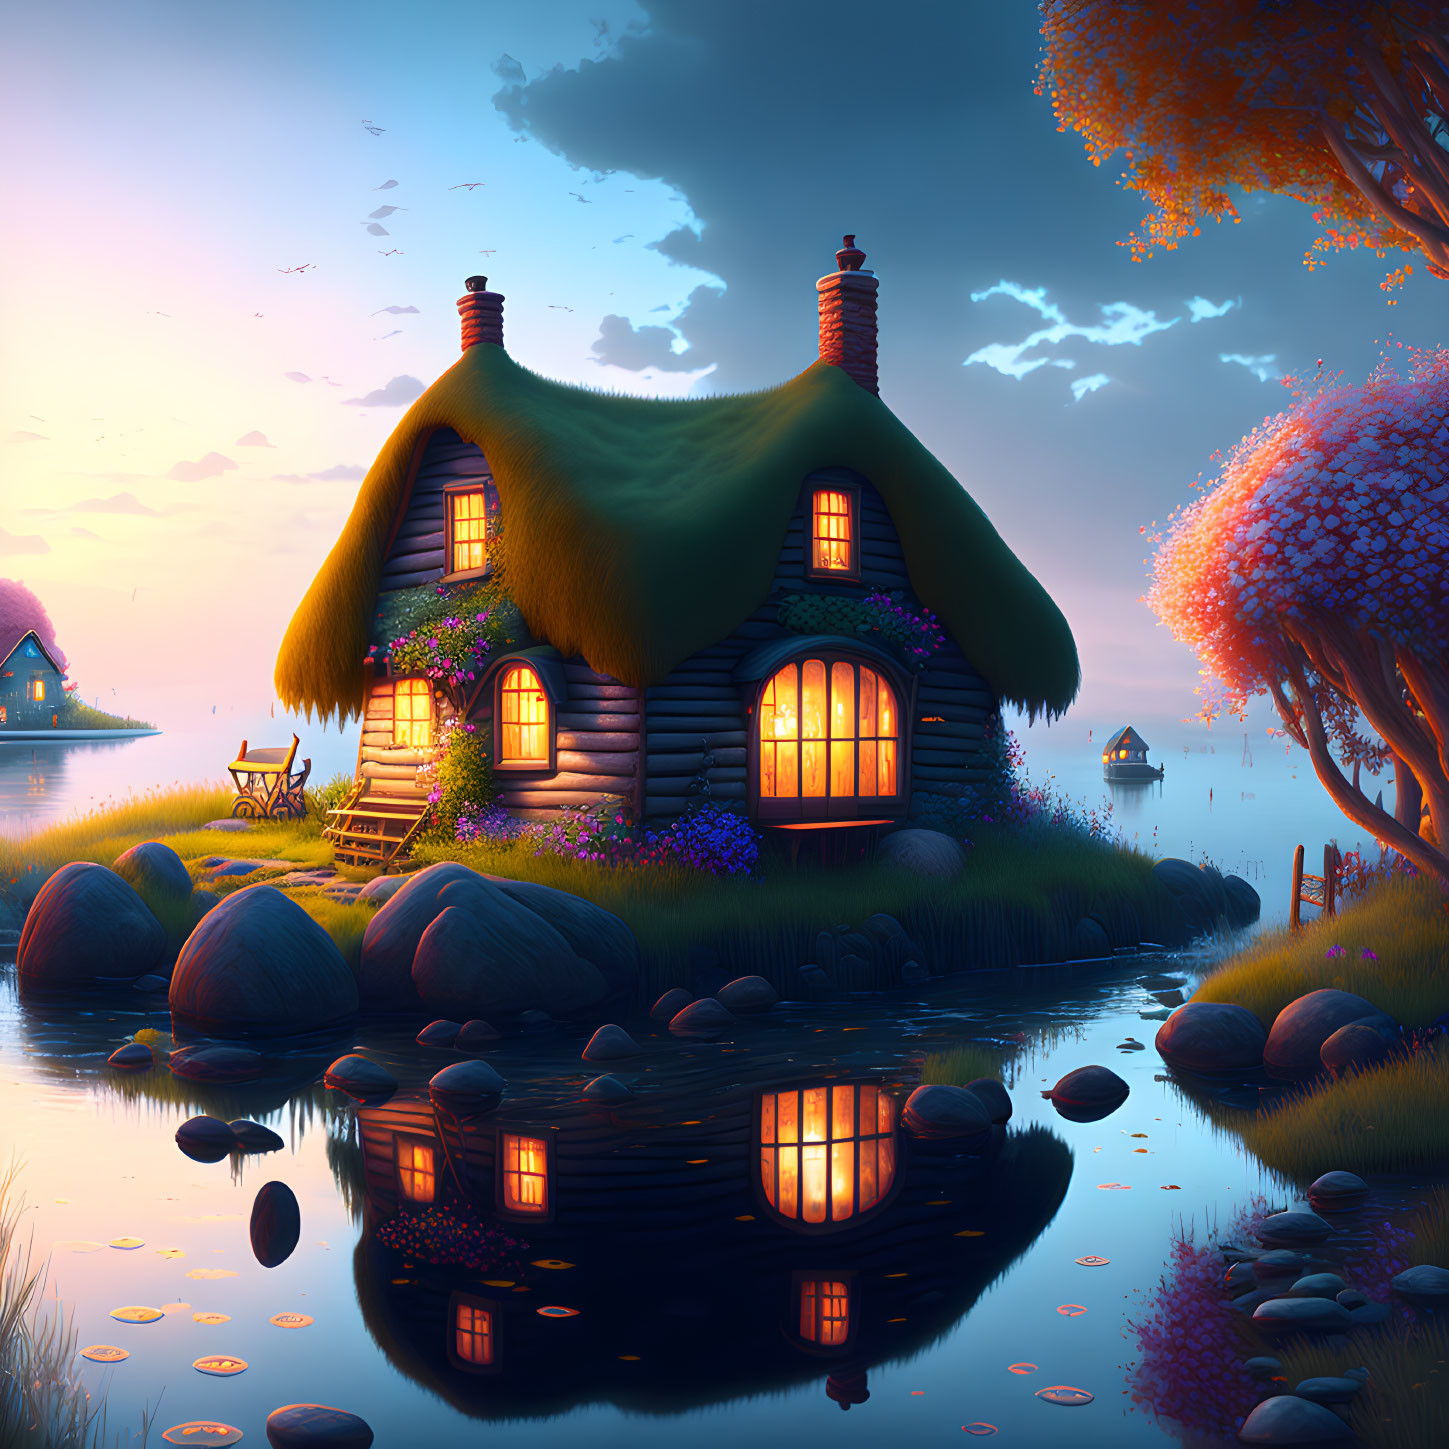 Cottage near the water